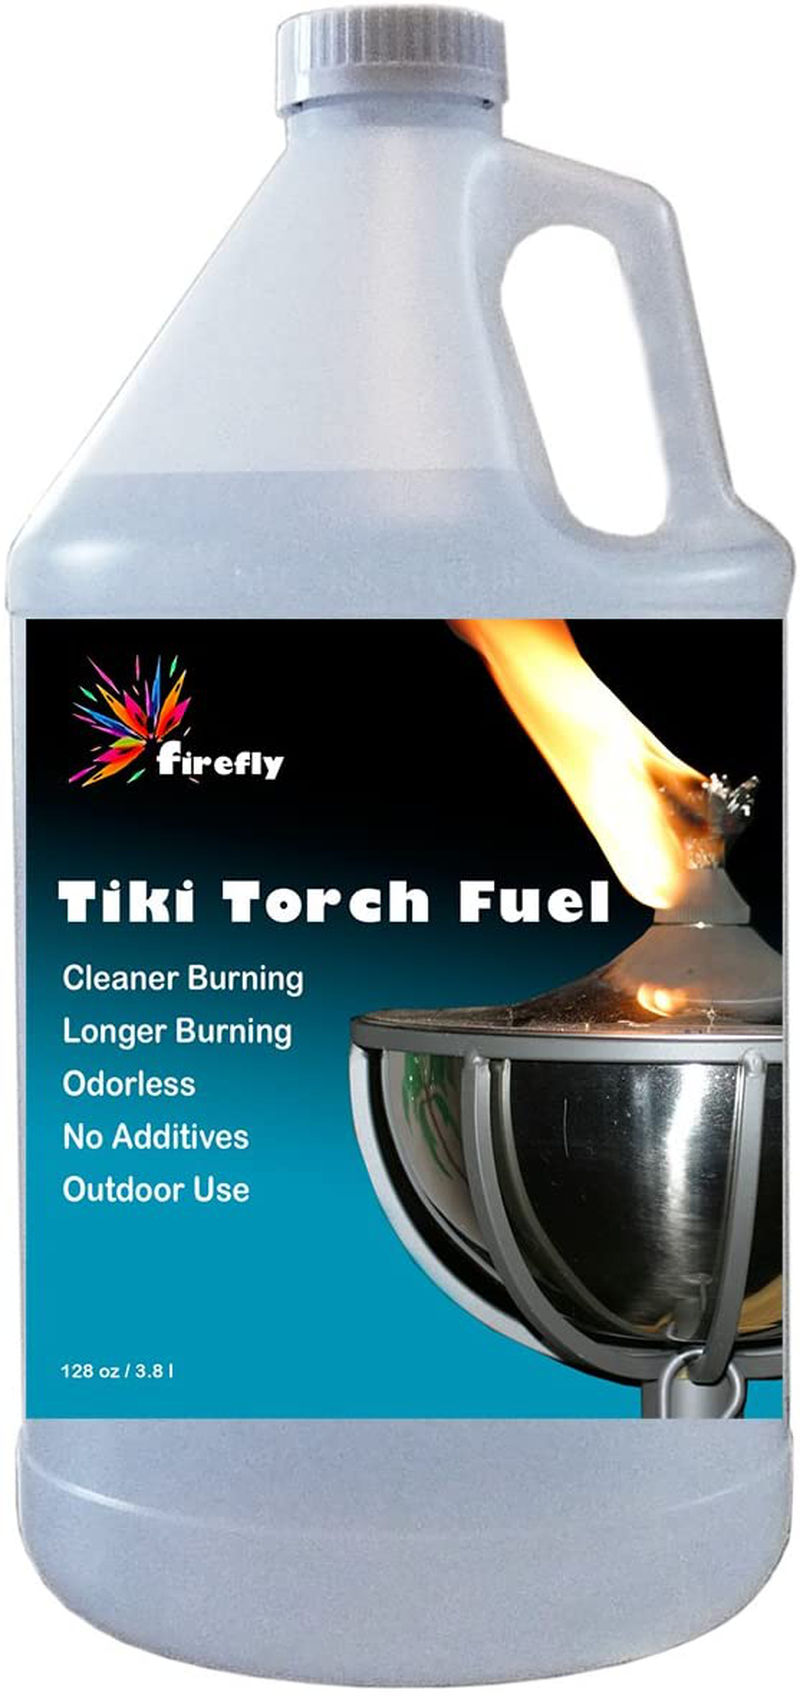 Firefly Bulk Tiki Fuel - Tiki Torch Fuel - 5 Gallons - Odorless - Significantly Longer Burn Home & Garden > Lighting Accessories > Oil Lamp Fuel Firefly Plain 1 Gallon 